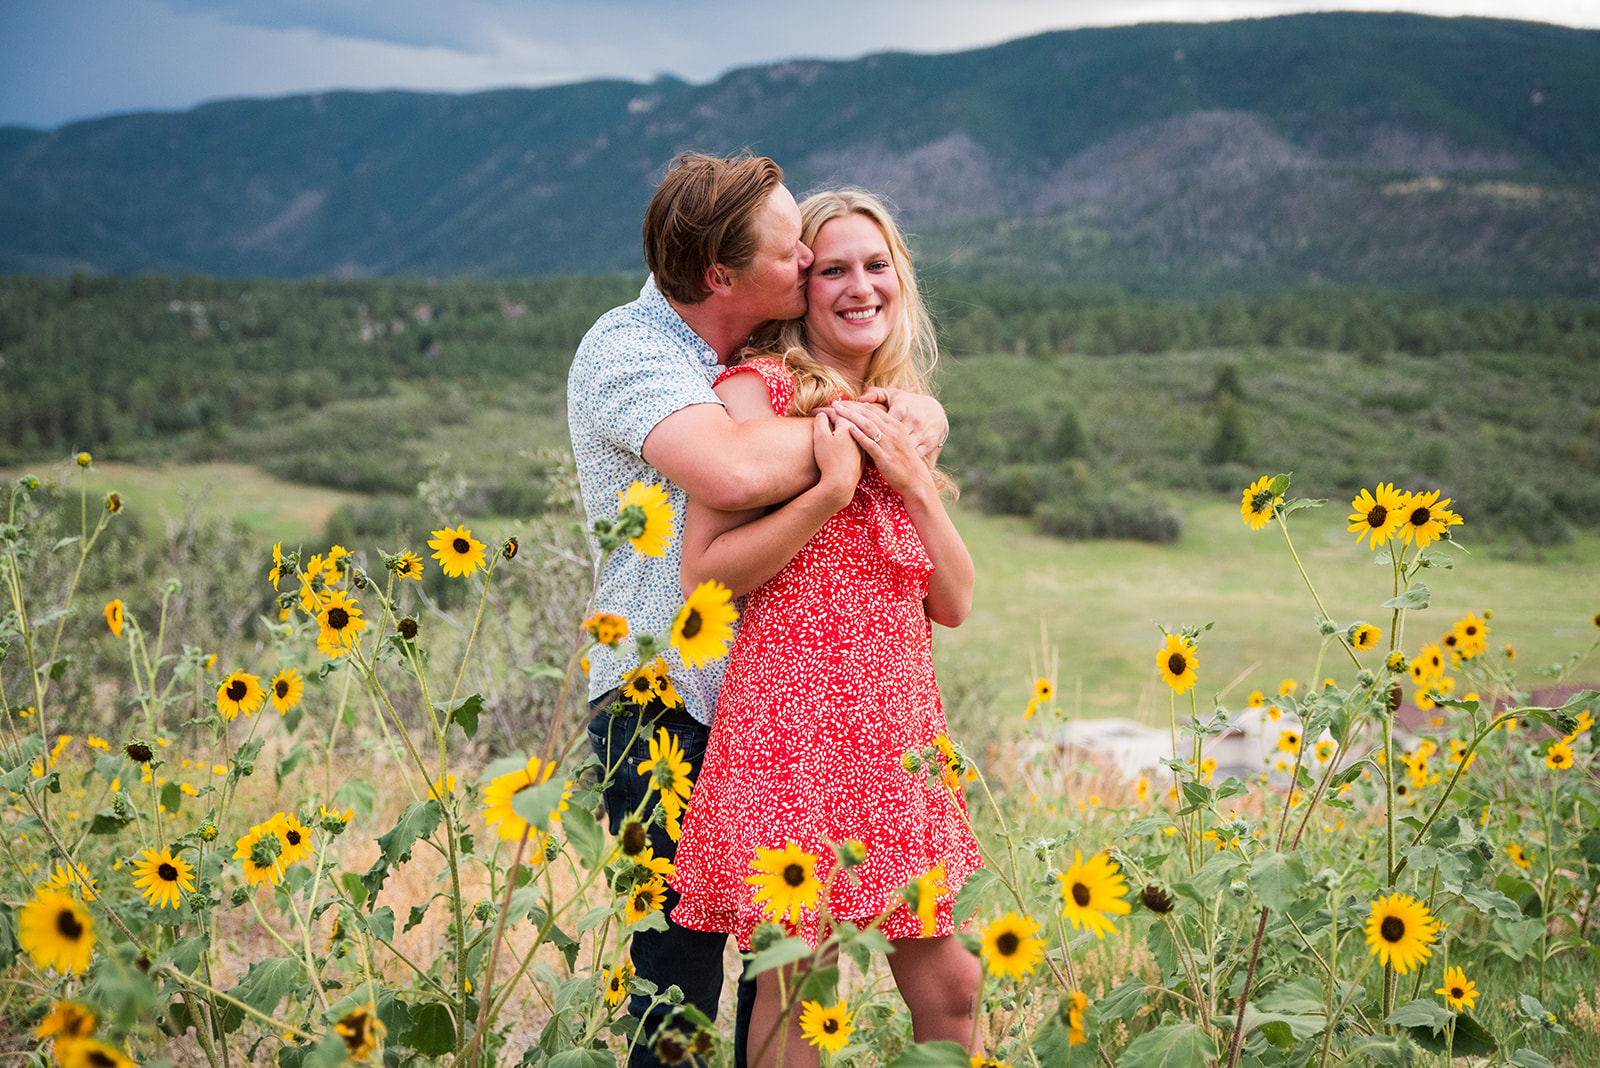 A man embraces his fiancée and kisses her on the cheek while standing in s field of sunflowers.